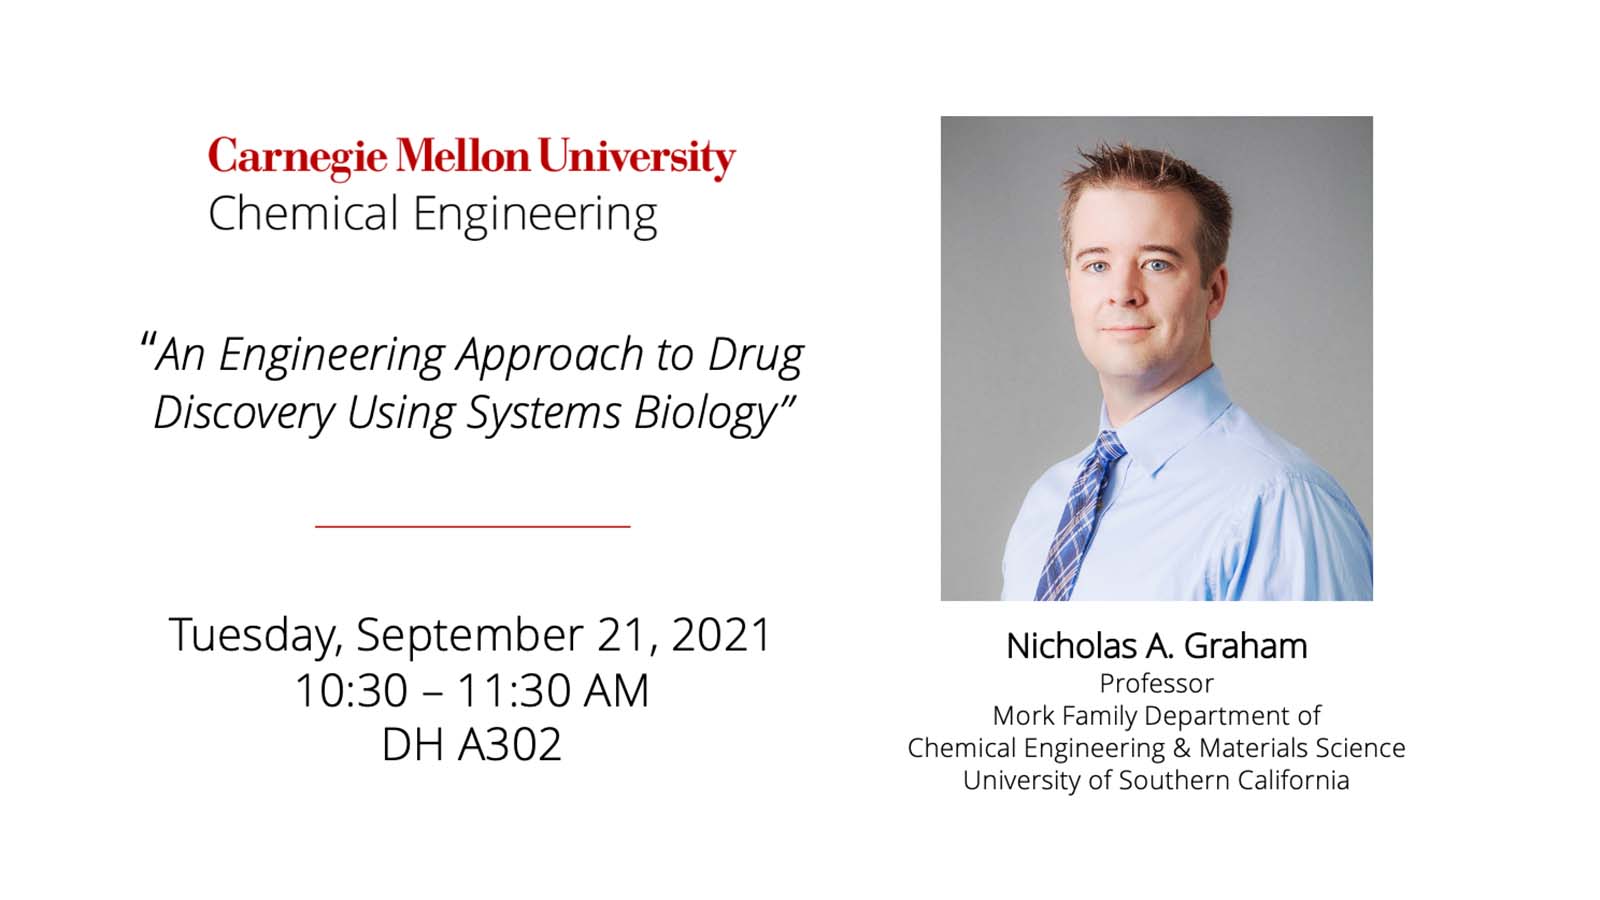 Graphic - Carnegie Mellon University Chemical Engineering - Photo of Dr. Nicholas A. Graham, professor in the Mork Family Department of Chemical Engineering and Material Sciences at the University of Southern California - Presenting "An Engineering Approach to Drug Discovery Using Systems Biology" on Tuesday, September 21, 2021 from 10:30 - 11:30 am in Doherty Hall Room A302